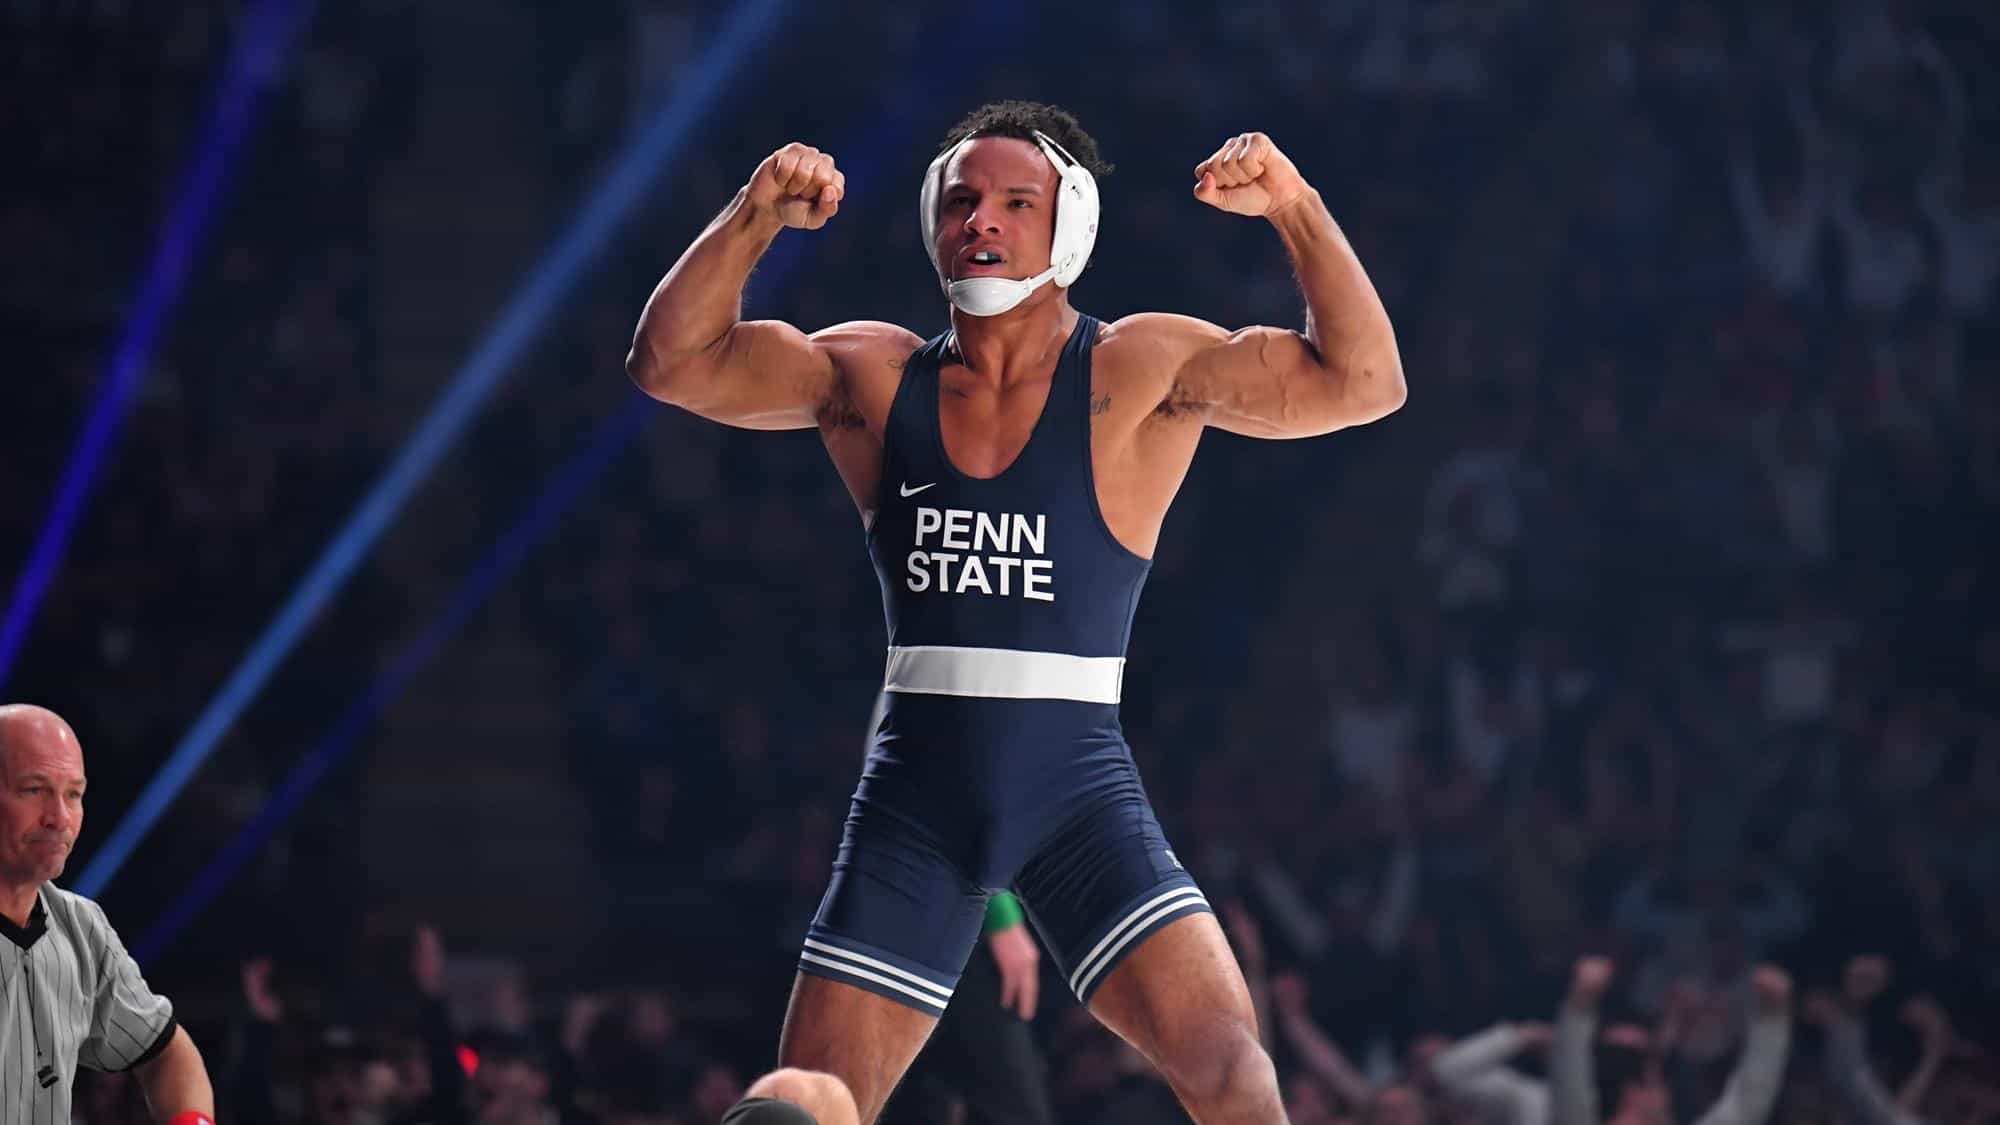 Why Is Penn State So Good At Wrestling?